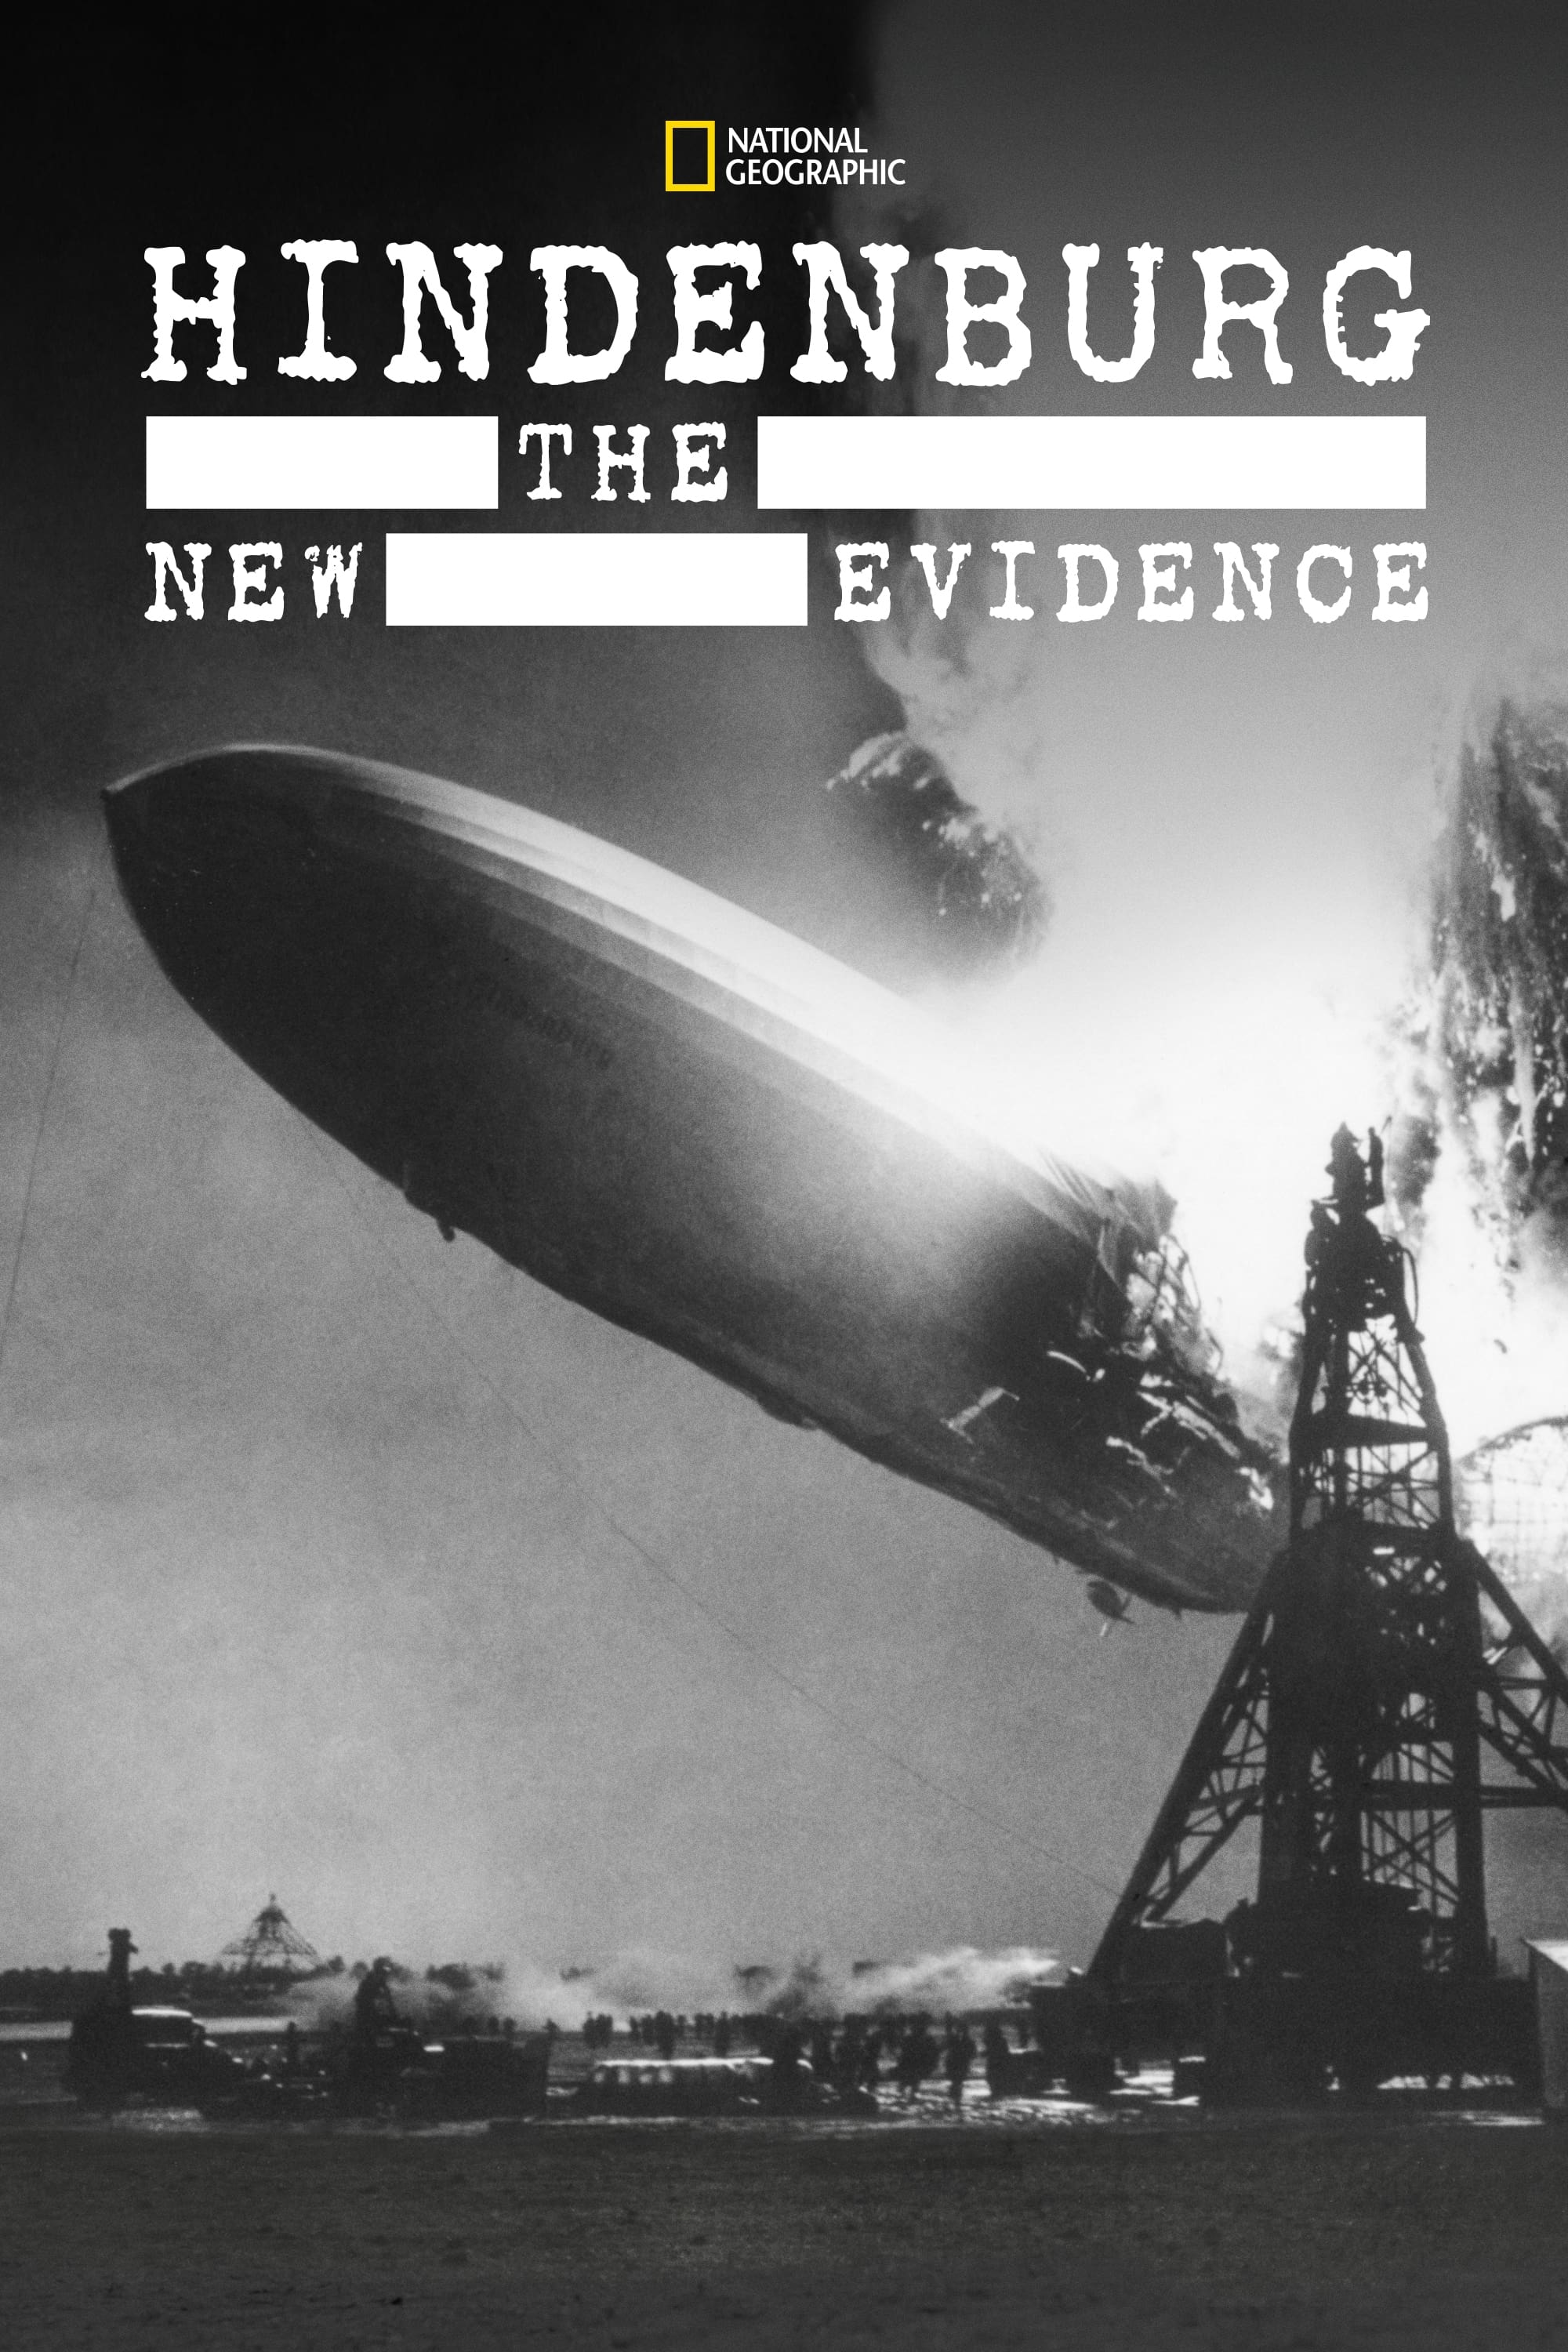 Hindenburg: The Lost Evidence